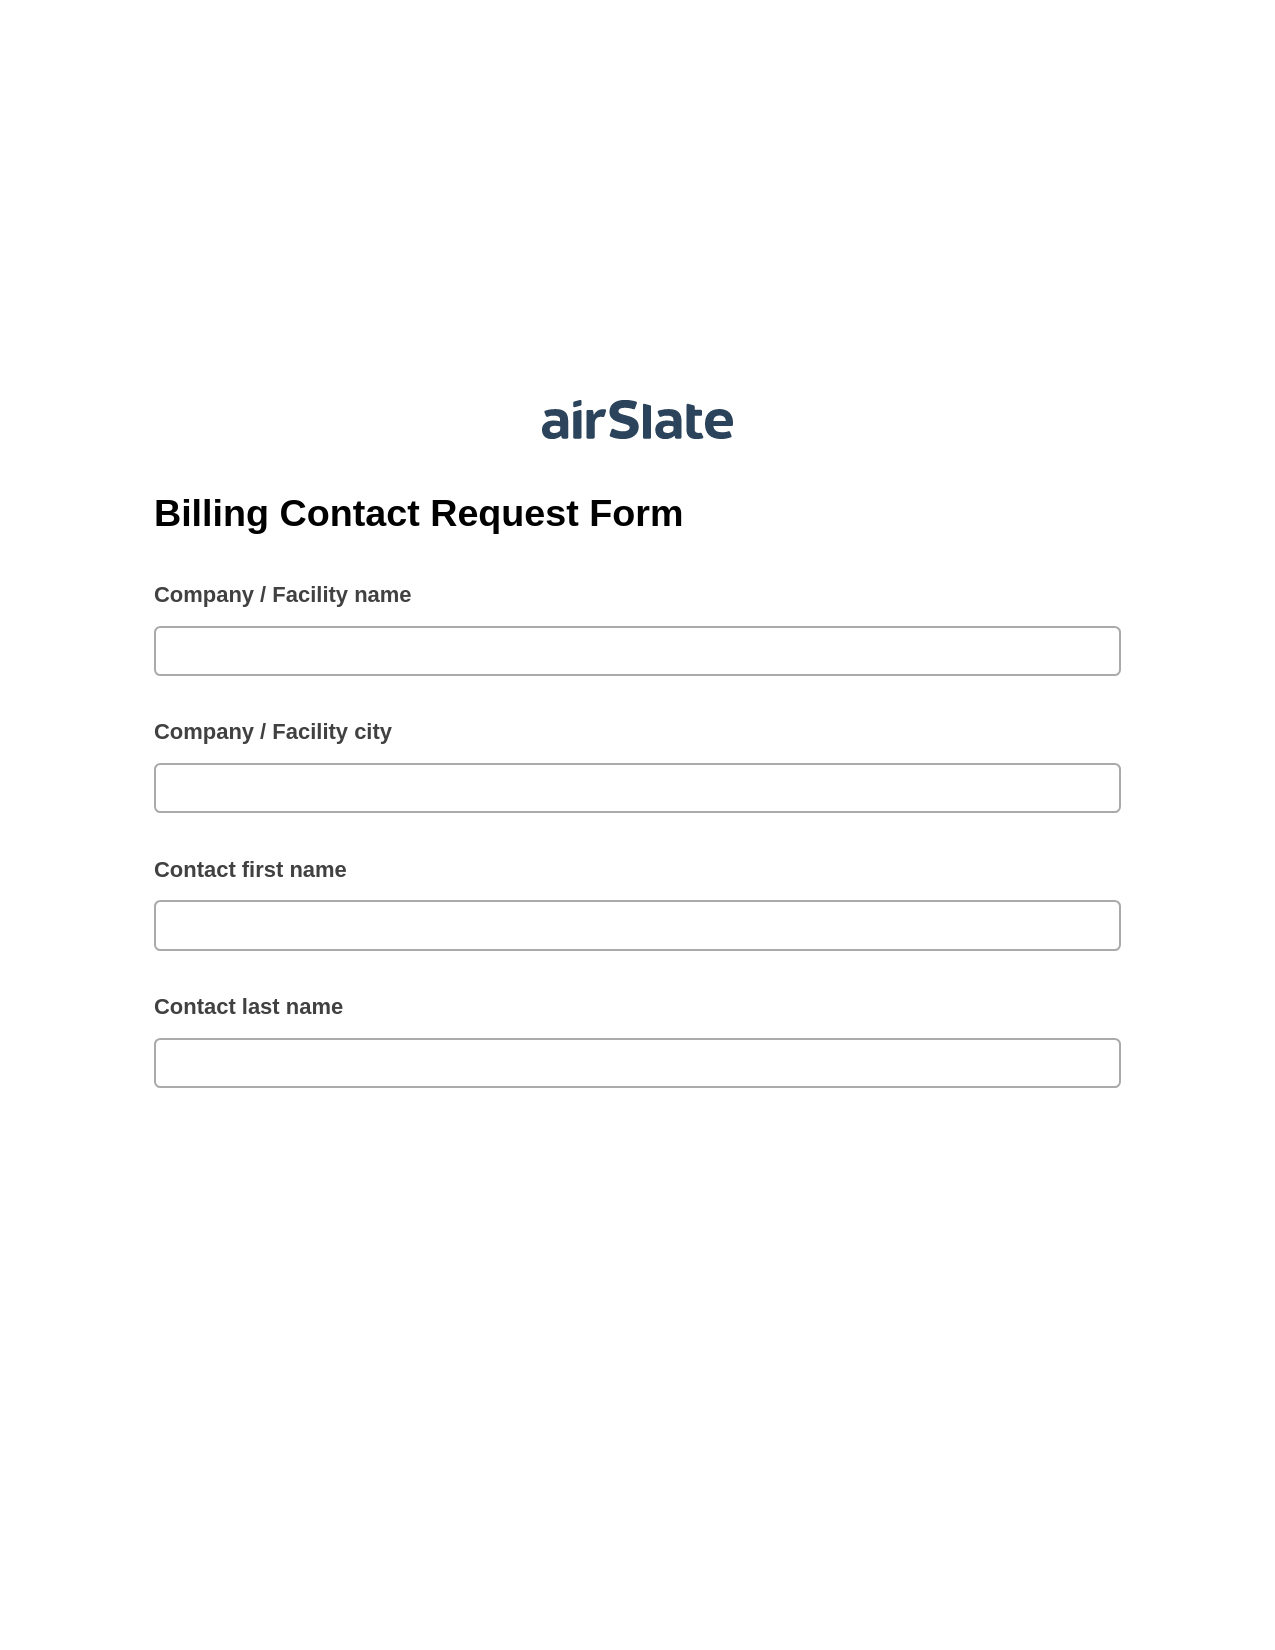 Billing Contact Request Form Pre-fill Slate from MS Dynamics 365 Records Bot, Google Sheet Two-Way Binding Bot, Webhook Postfinish Bot